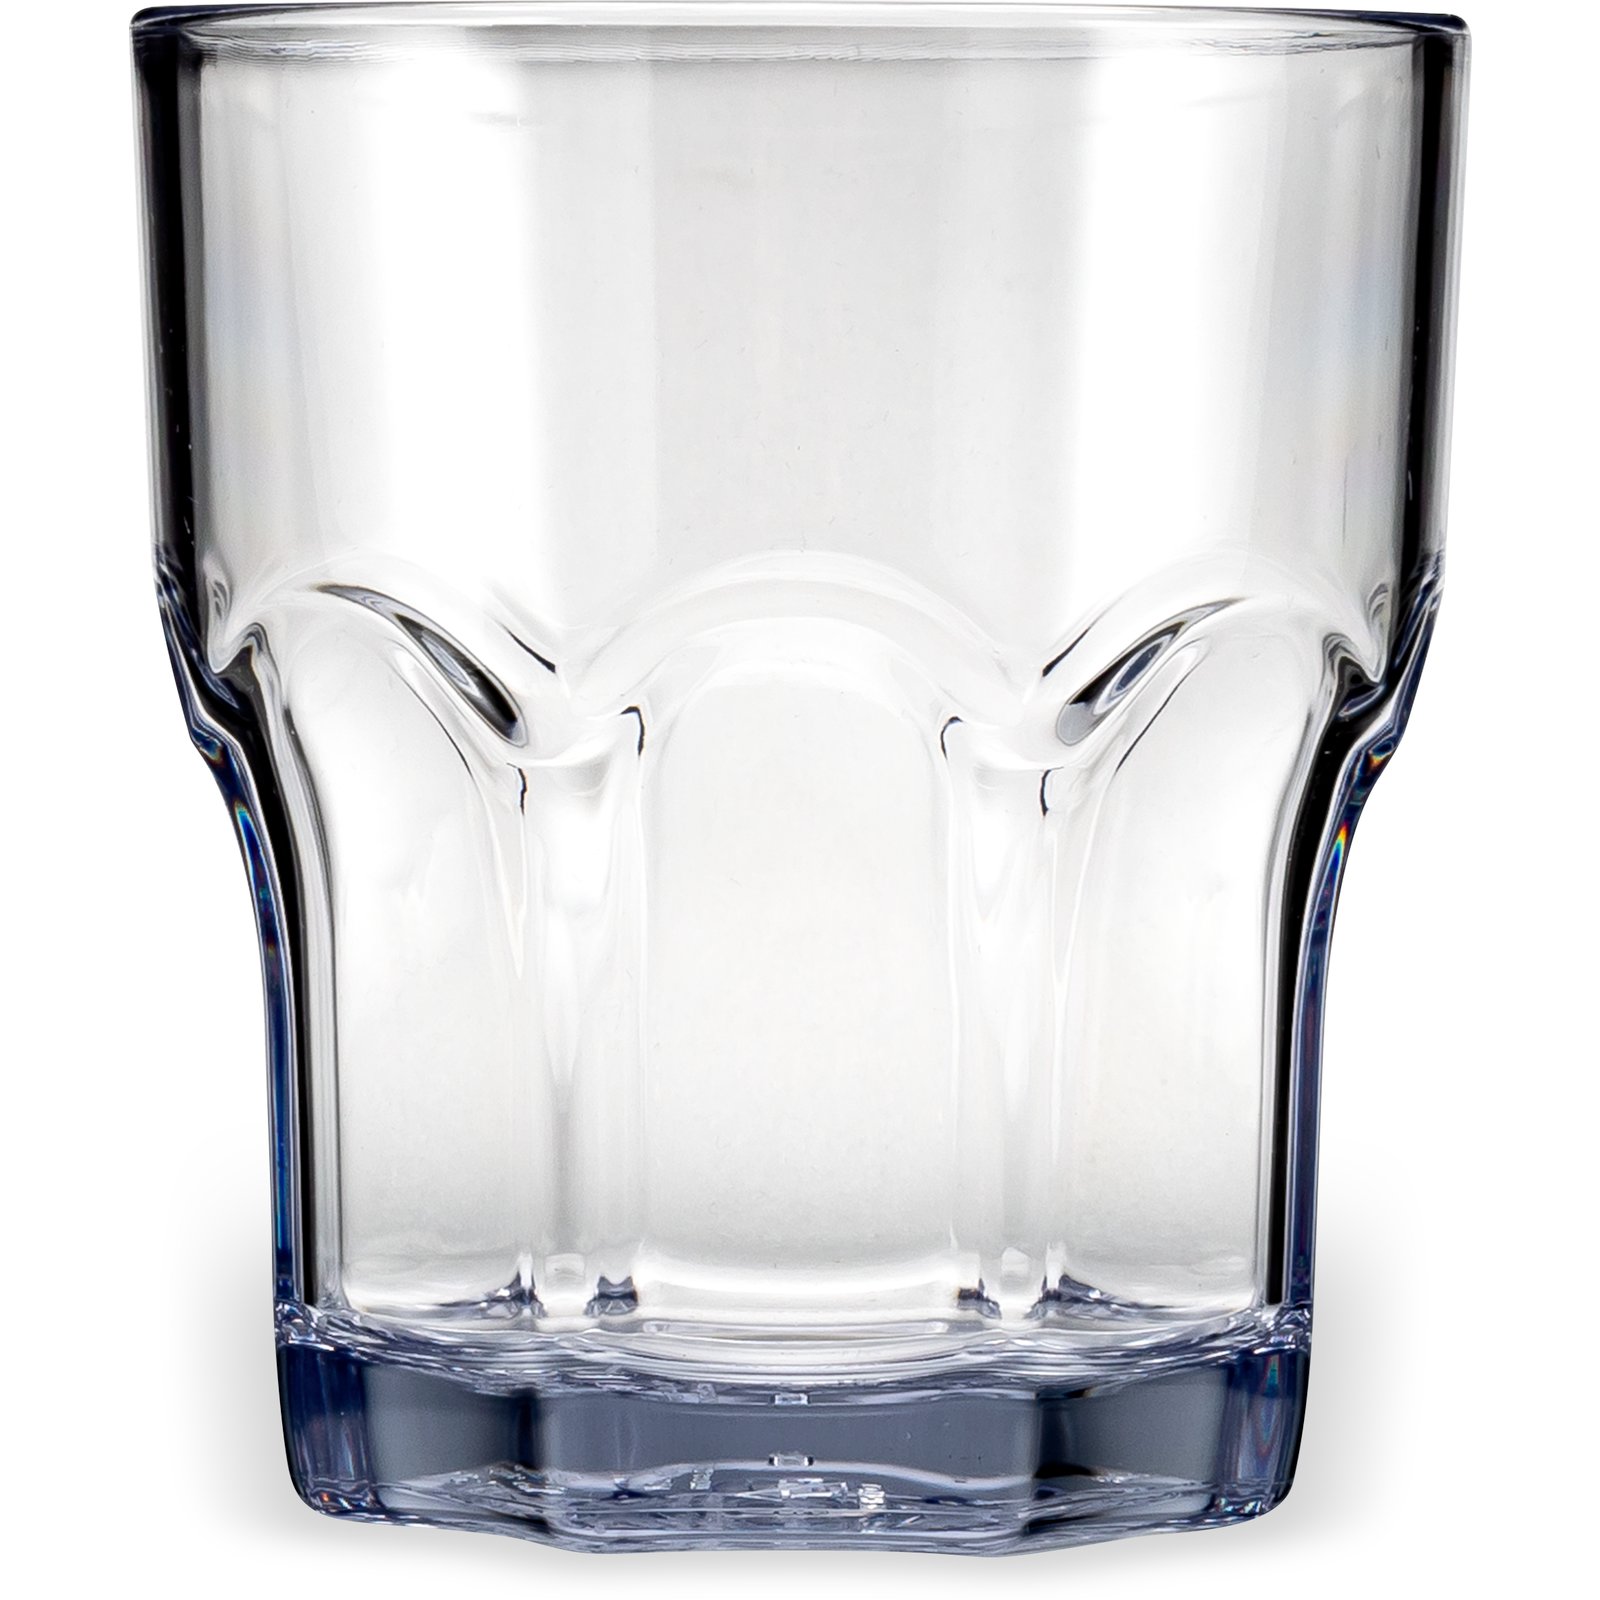 Carlisle Food Service Products Louis 32 oz. Water/Juice Glass (Set of 24)